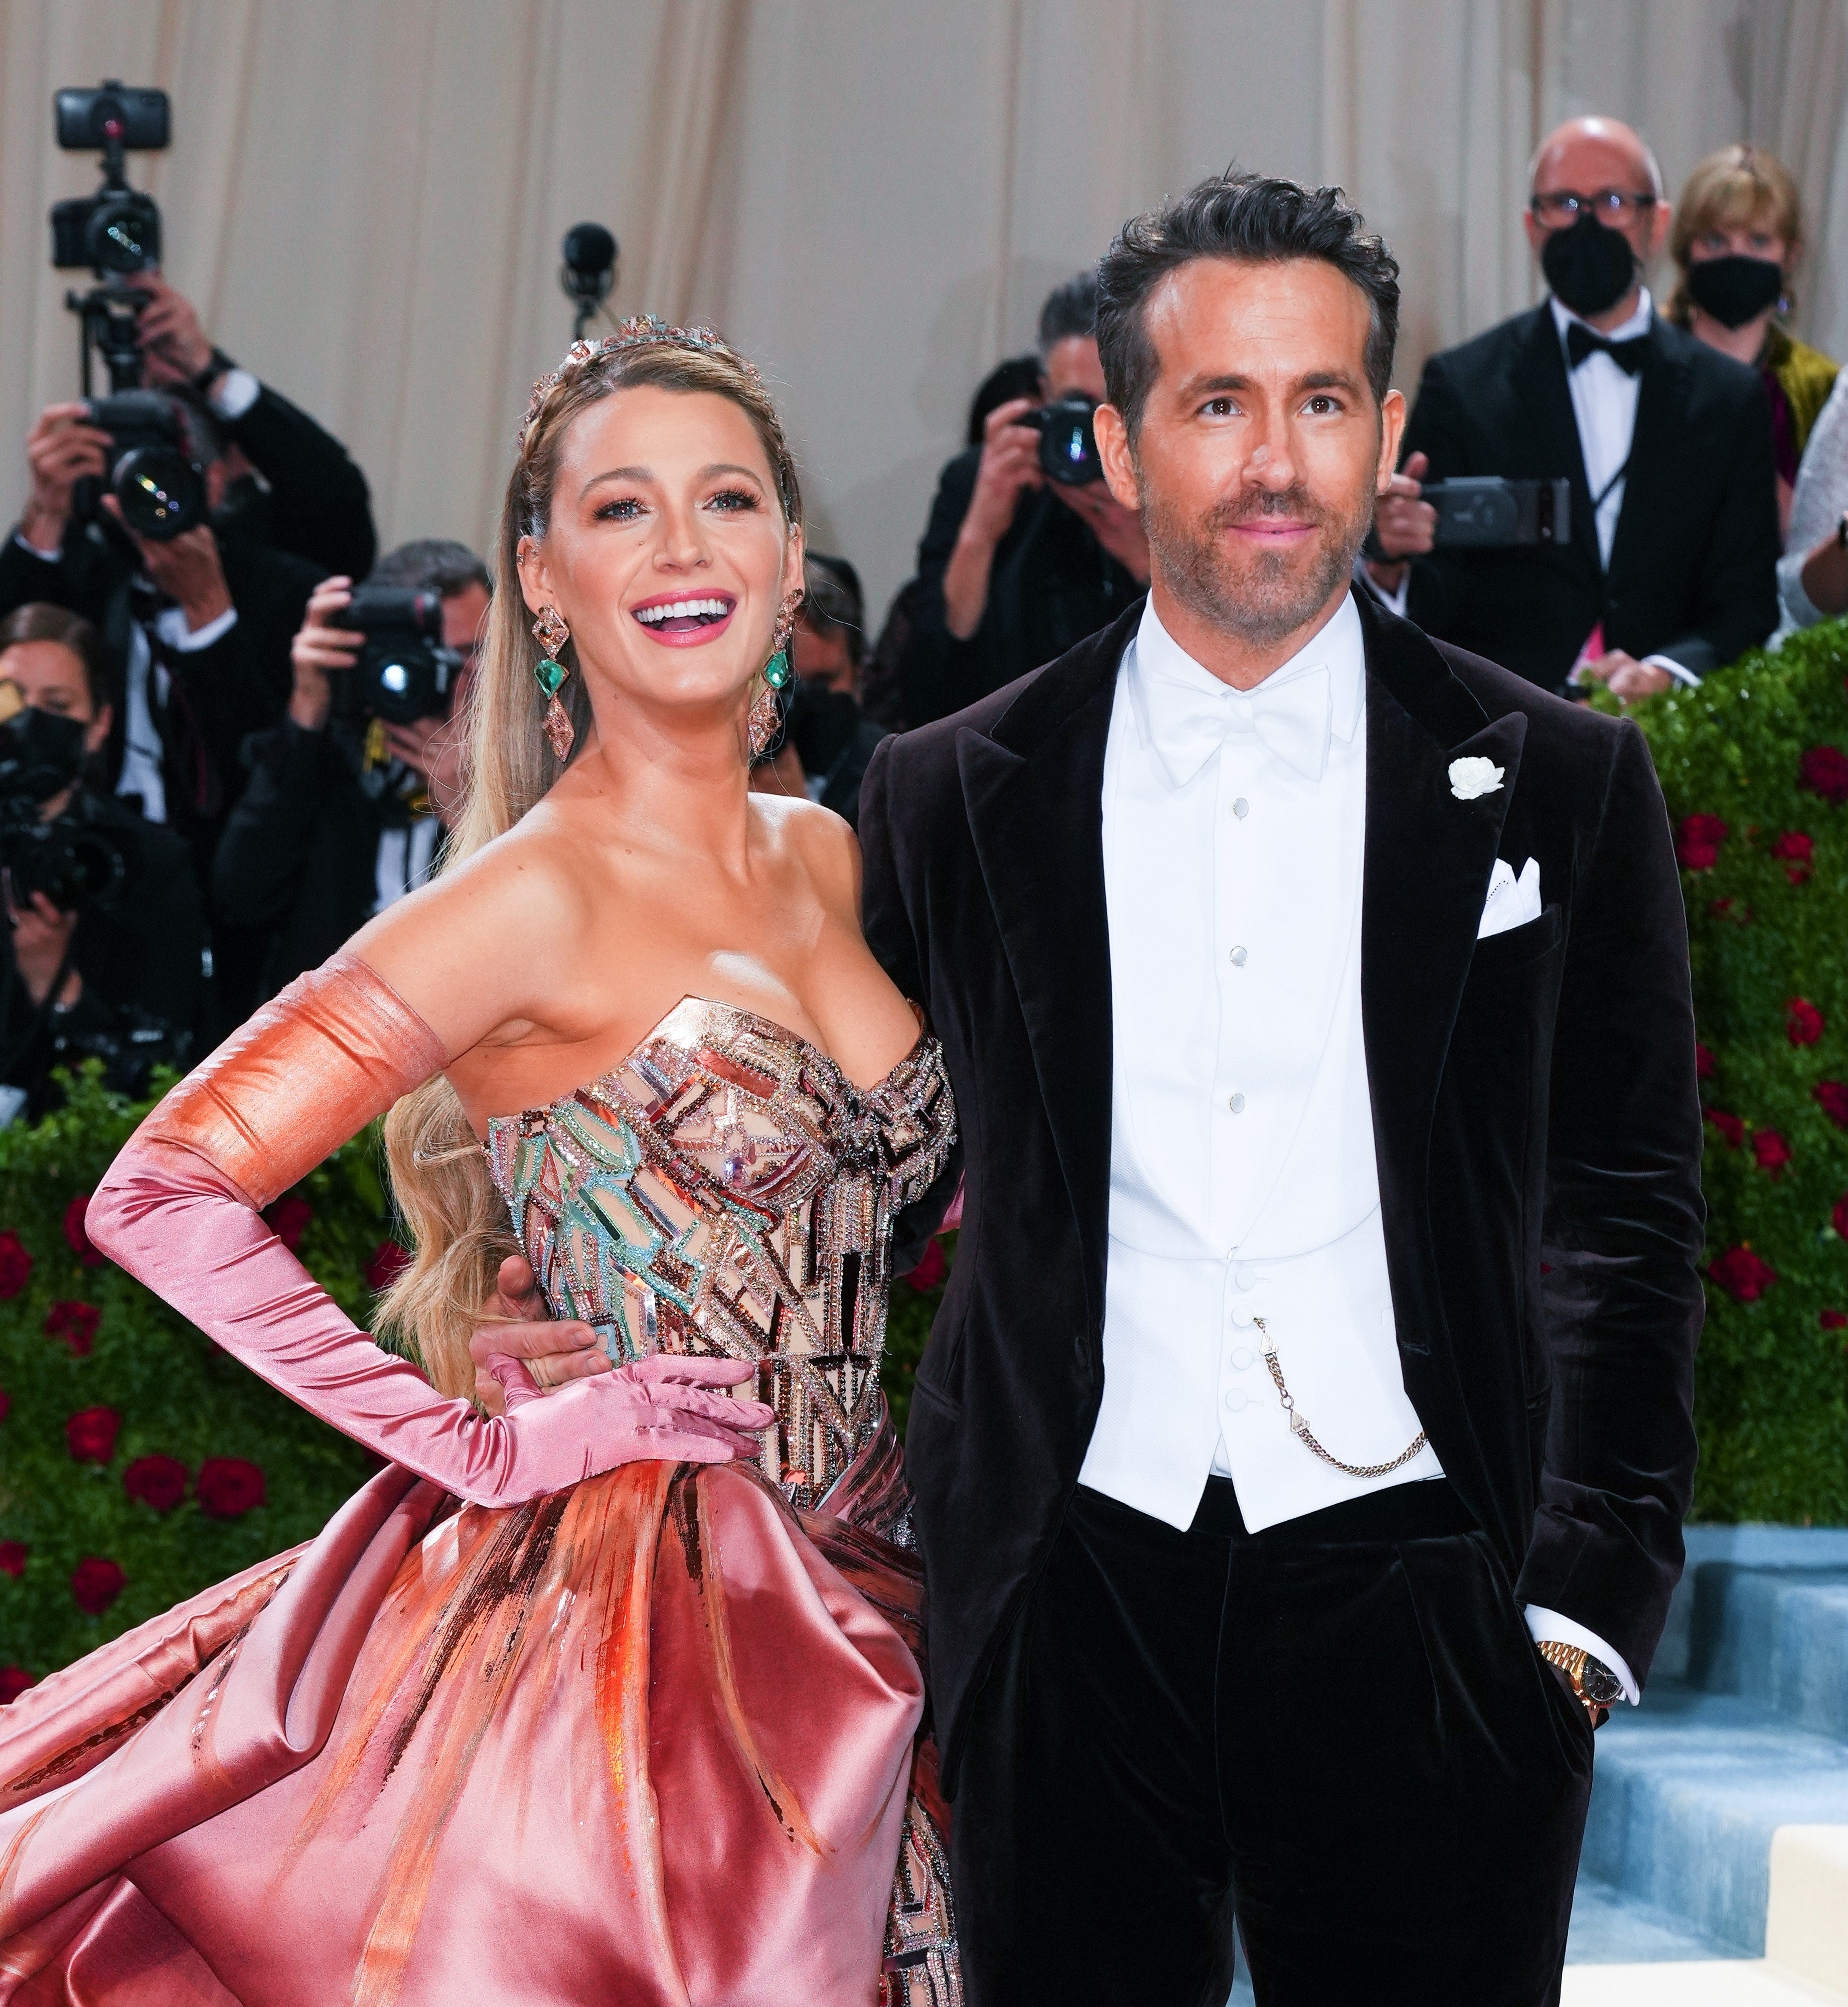 In photos: Blake Lively, Ryan Reynolds attend Time 100 Gala - All Photos 